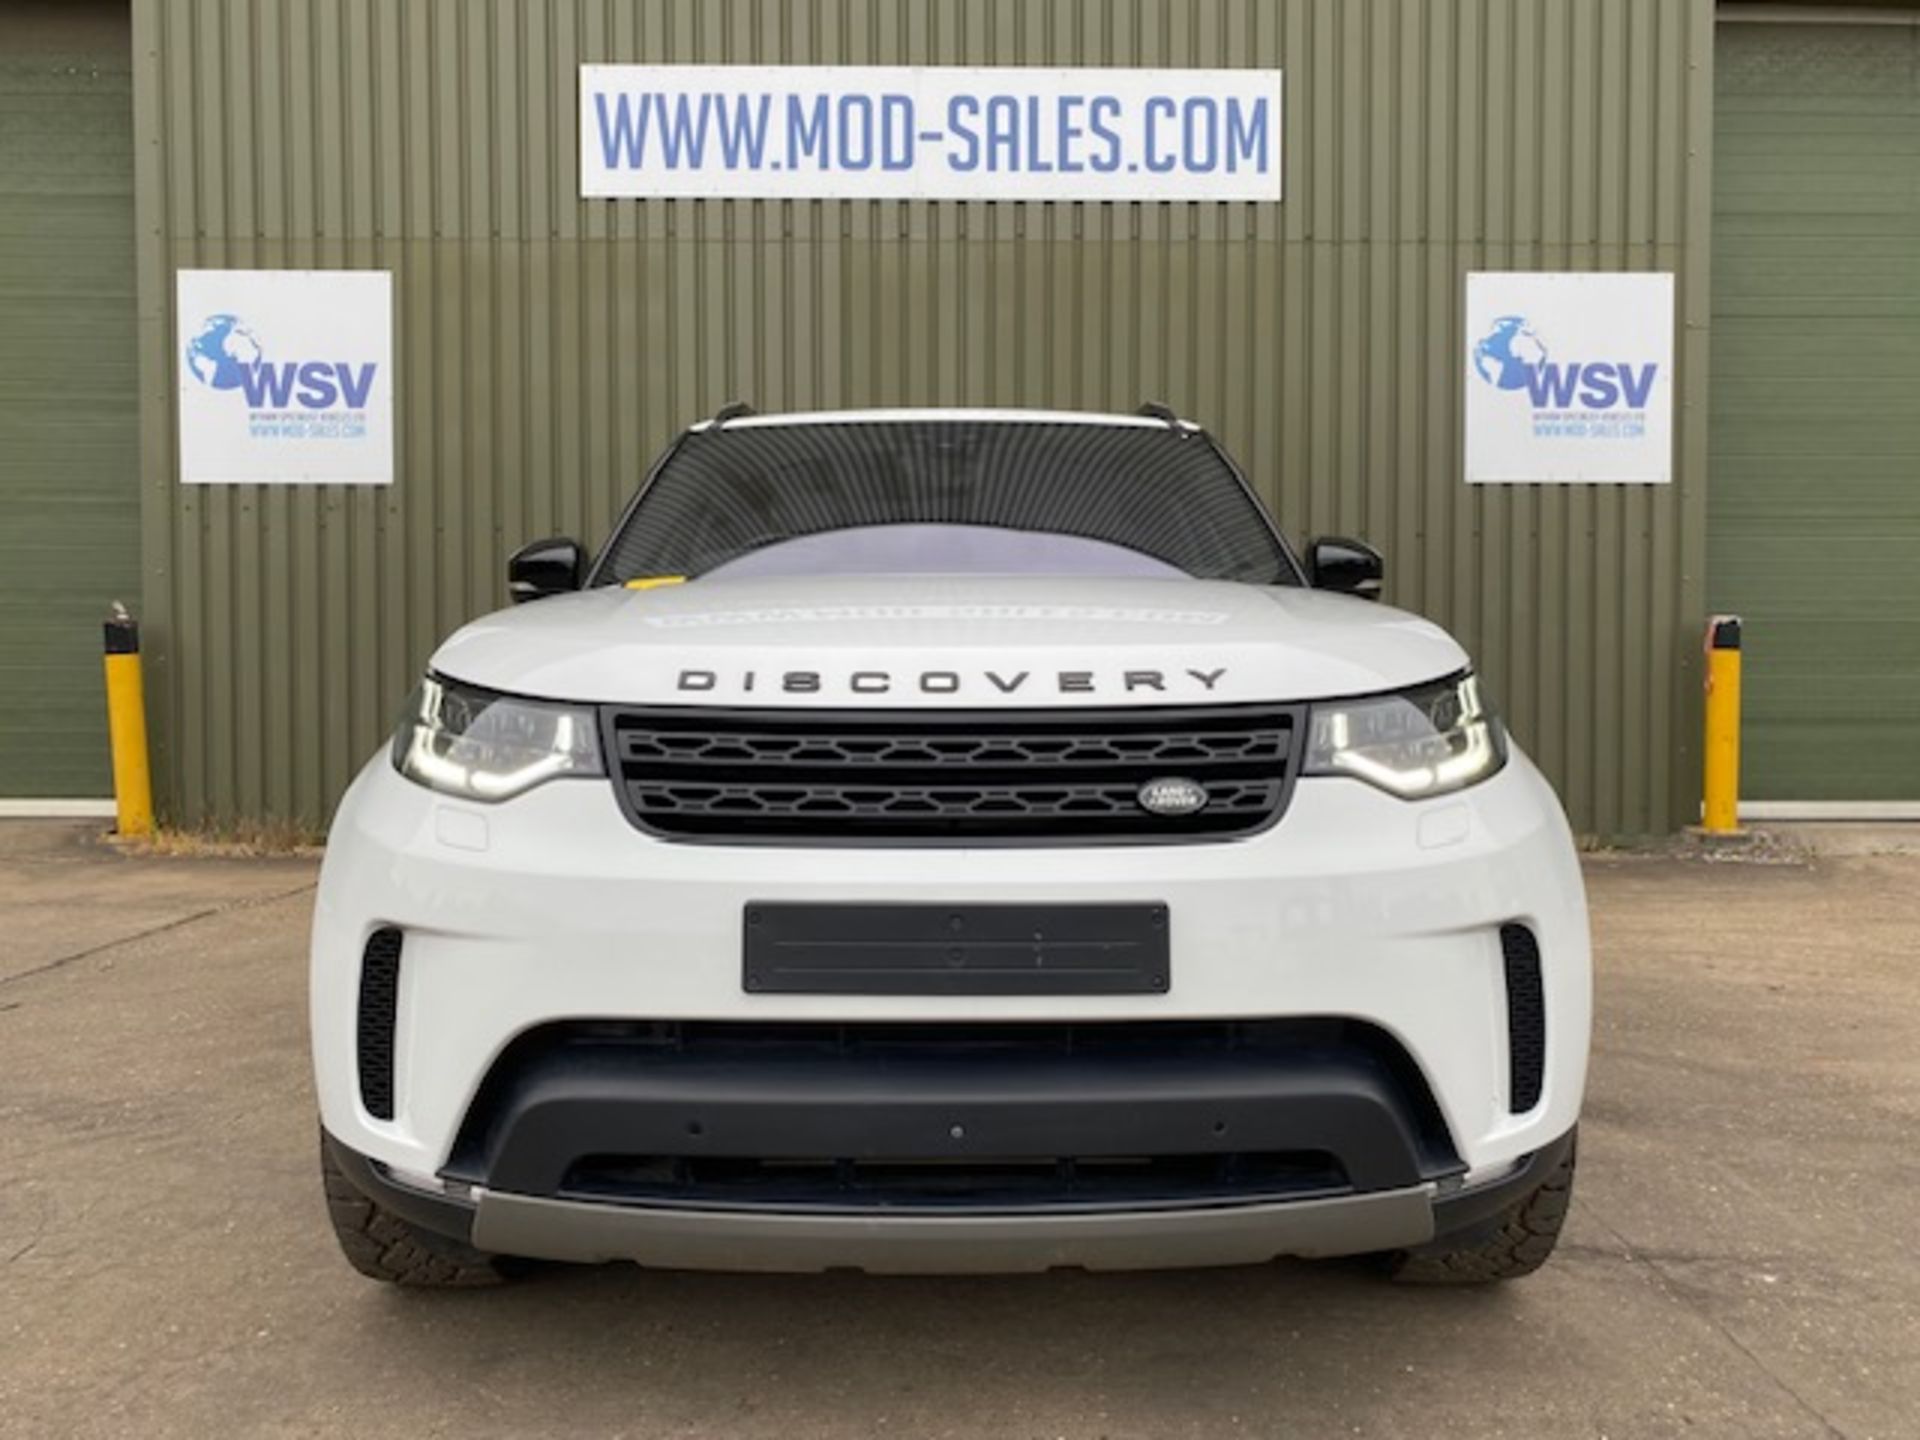 2019 model year Land Rover Discovery 5 3.0 TDV6 HSE Luxury RHD ONLY 5778 MILES! - Bild 2 aus 21